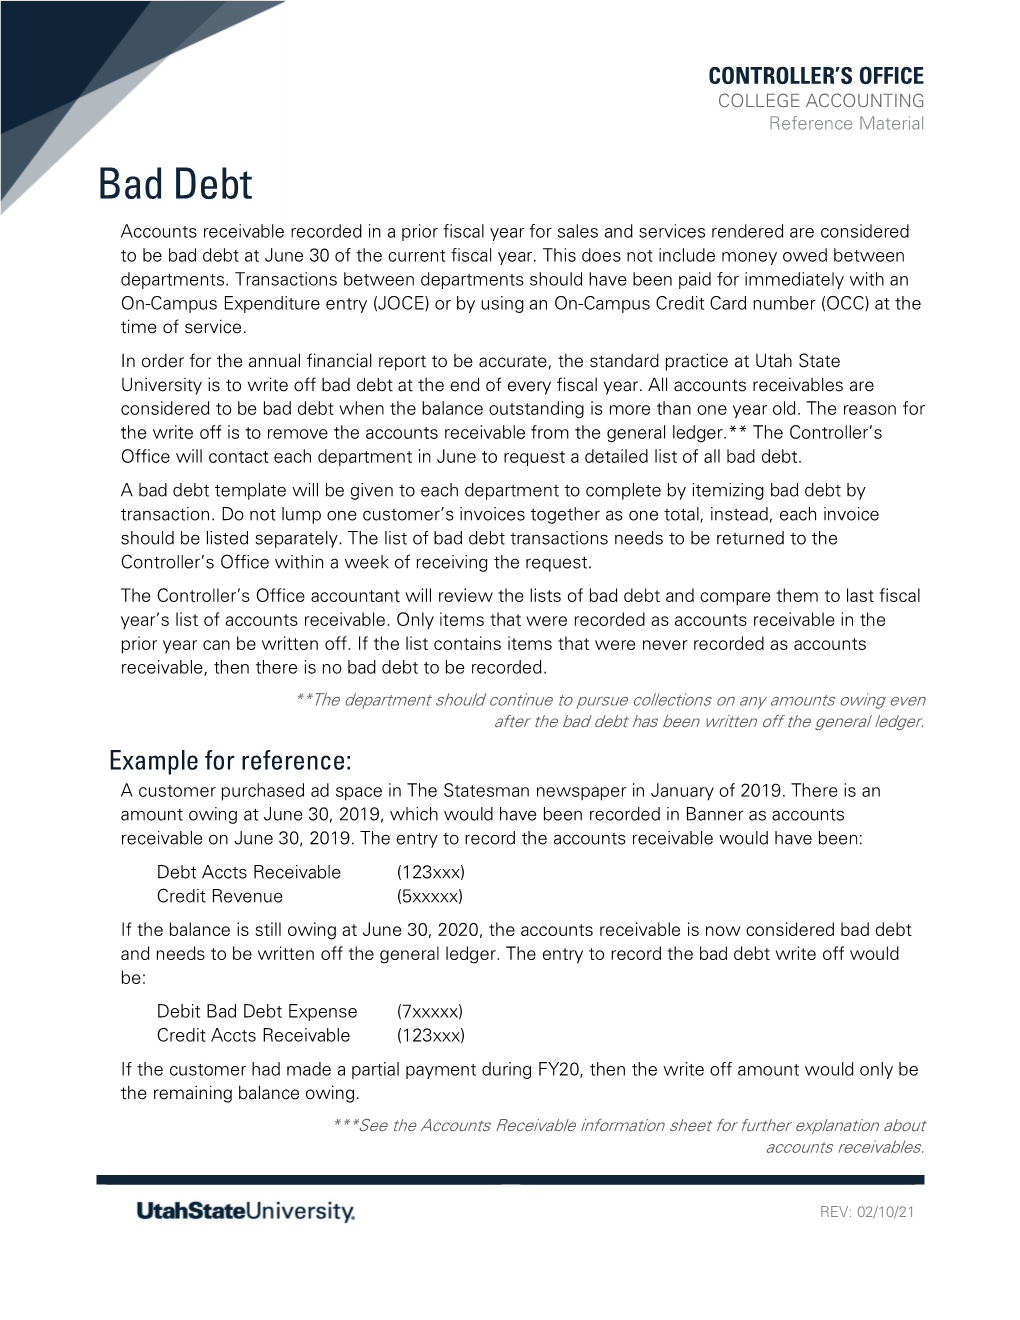 Bad Debt Accounts Receivable Recorded in a Prior Fiscal Year for Sales and Services Rendered Are Considered to Be Bad Debt at June 30 of the Current Fiscal Year